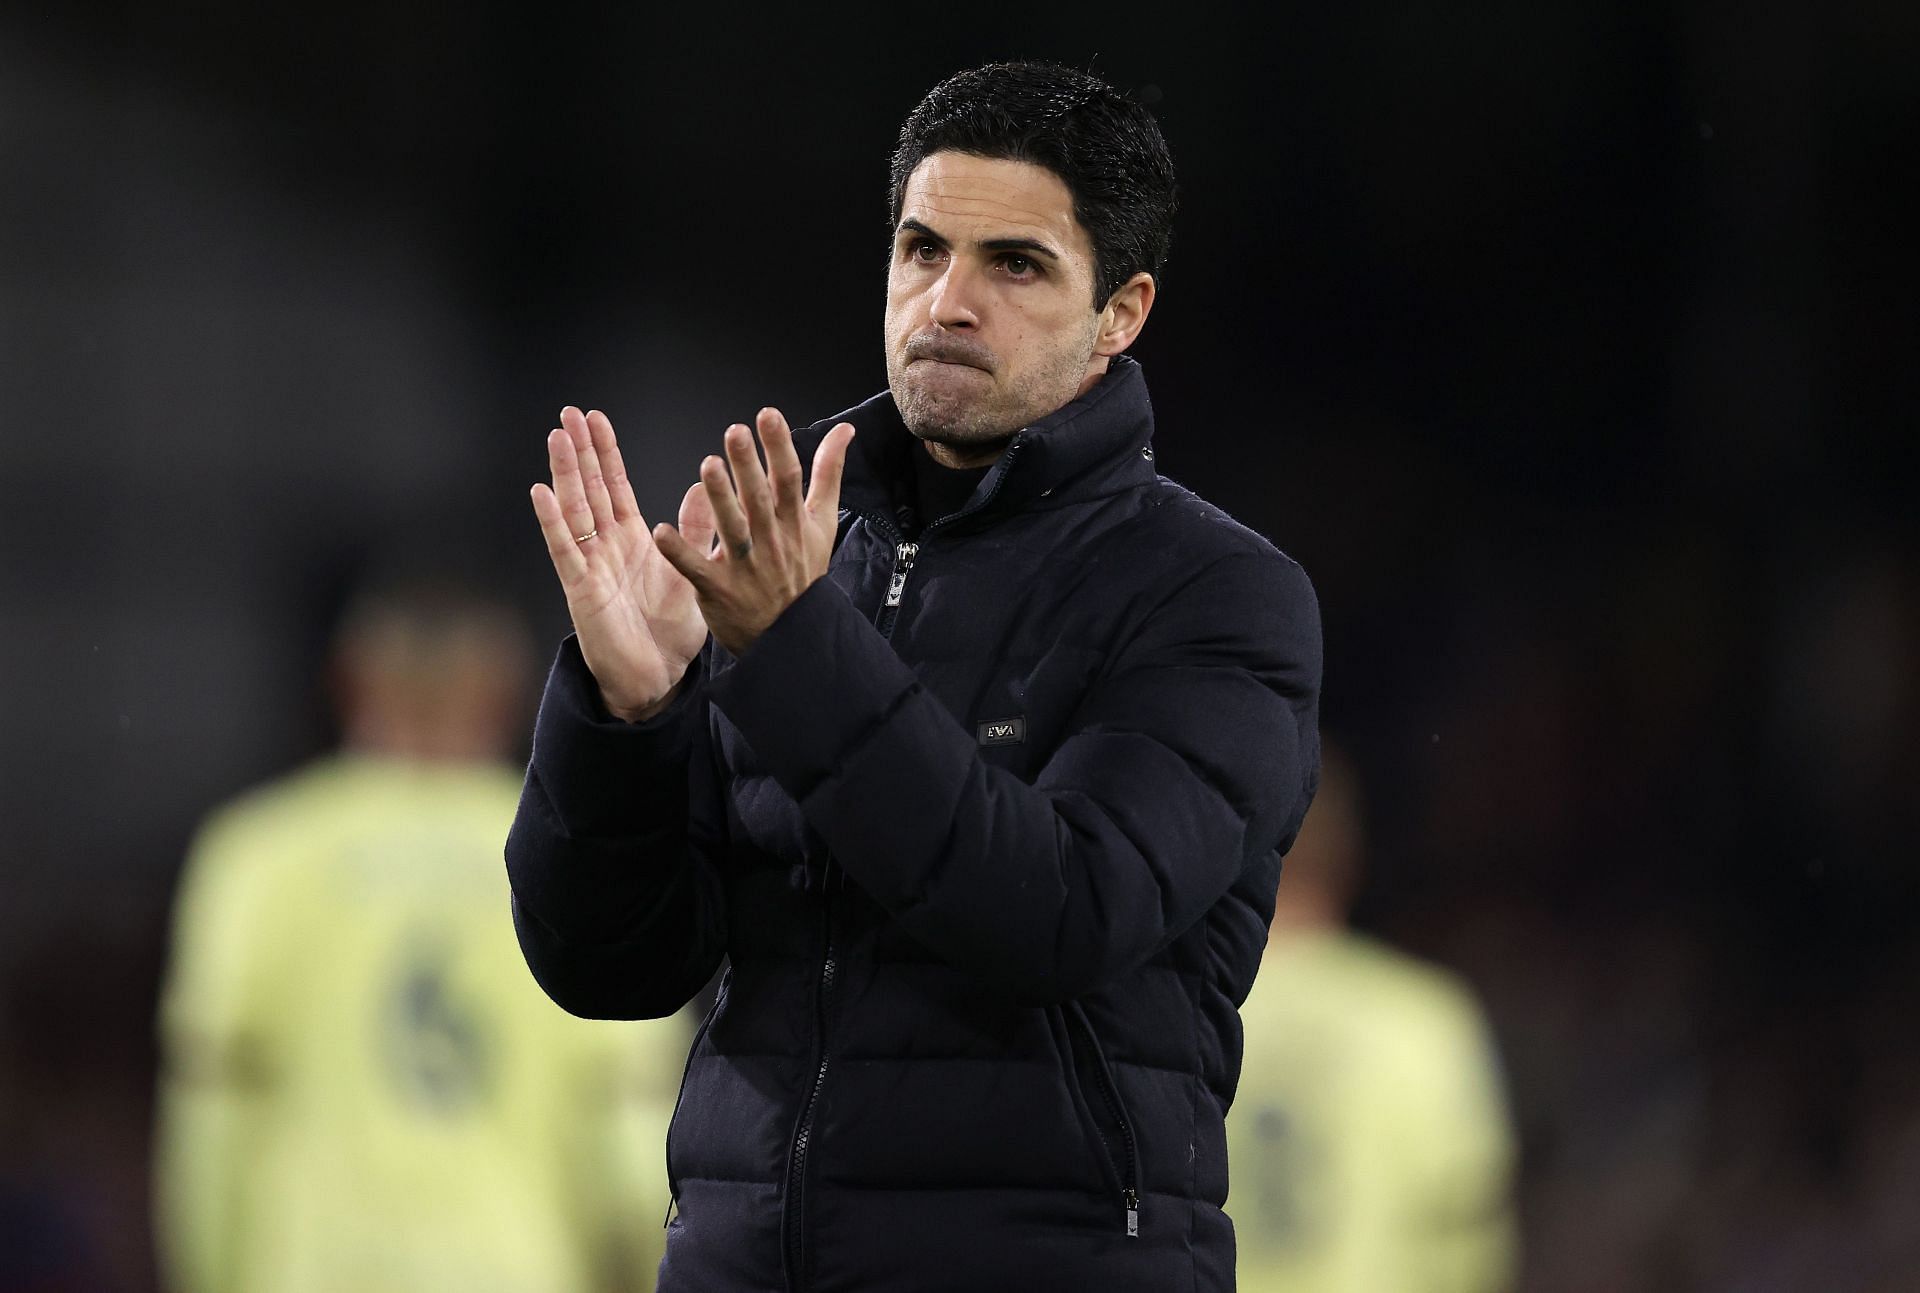 Arsenal manager Mikel Arteta is preparing to face Chelsea.